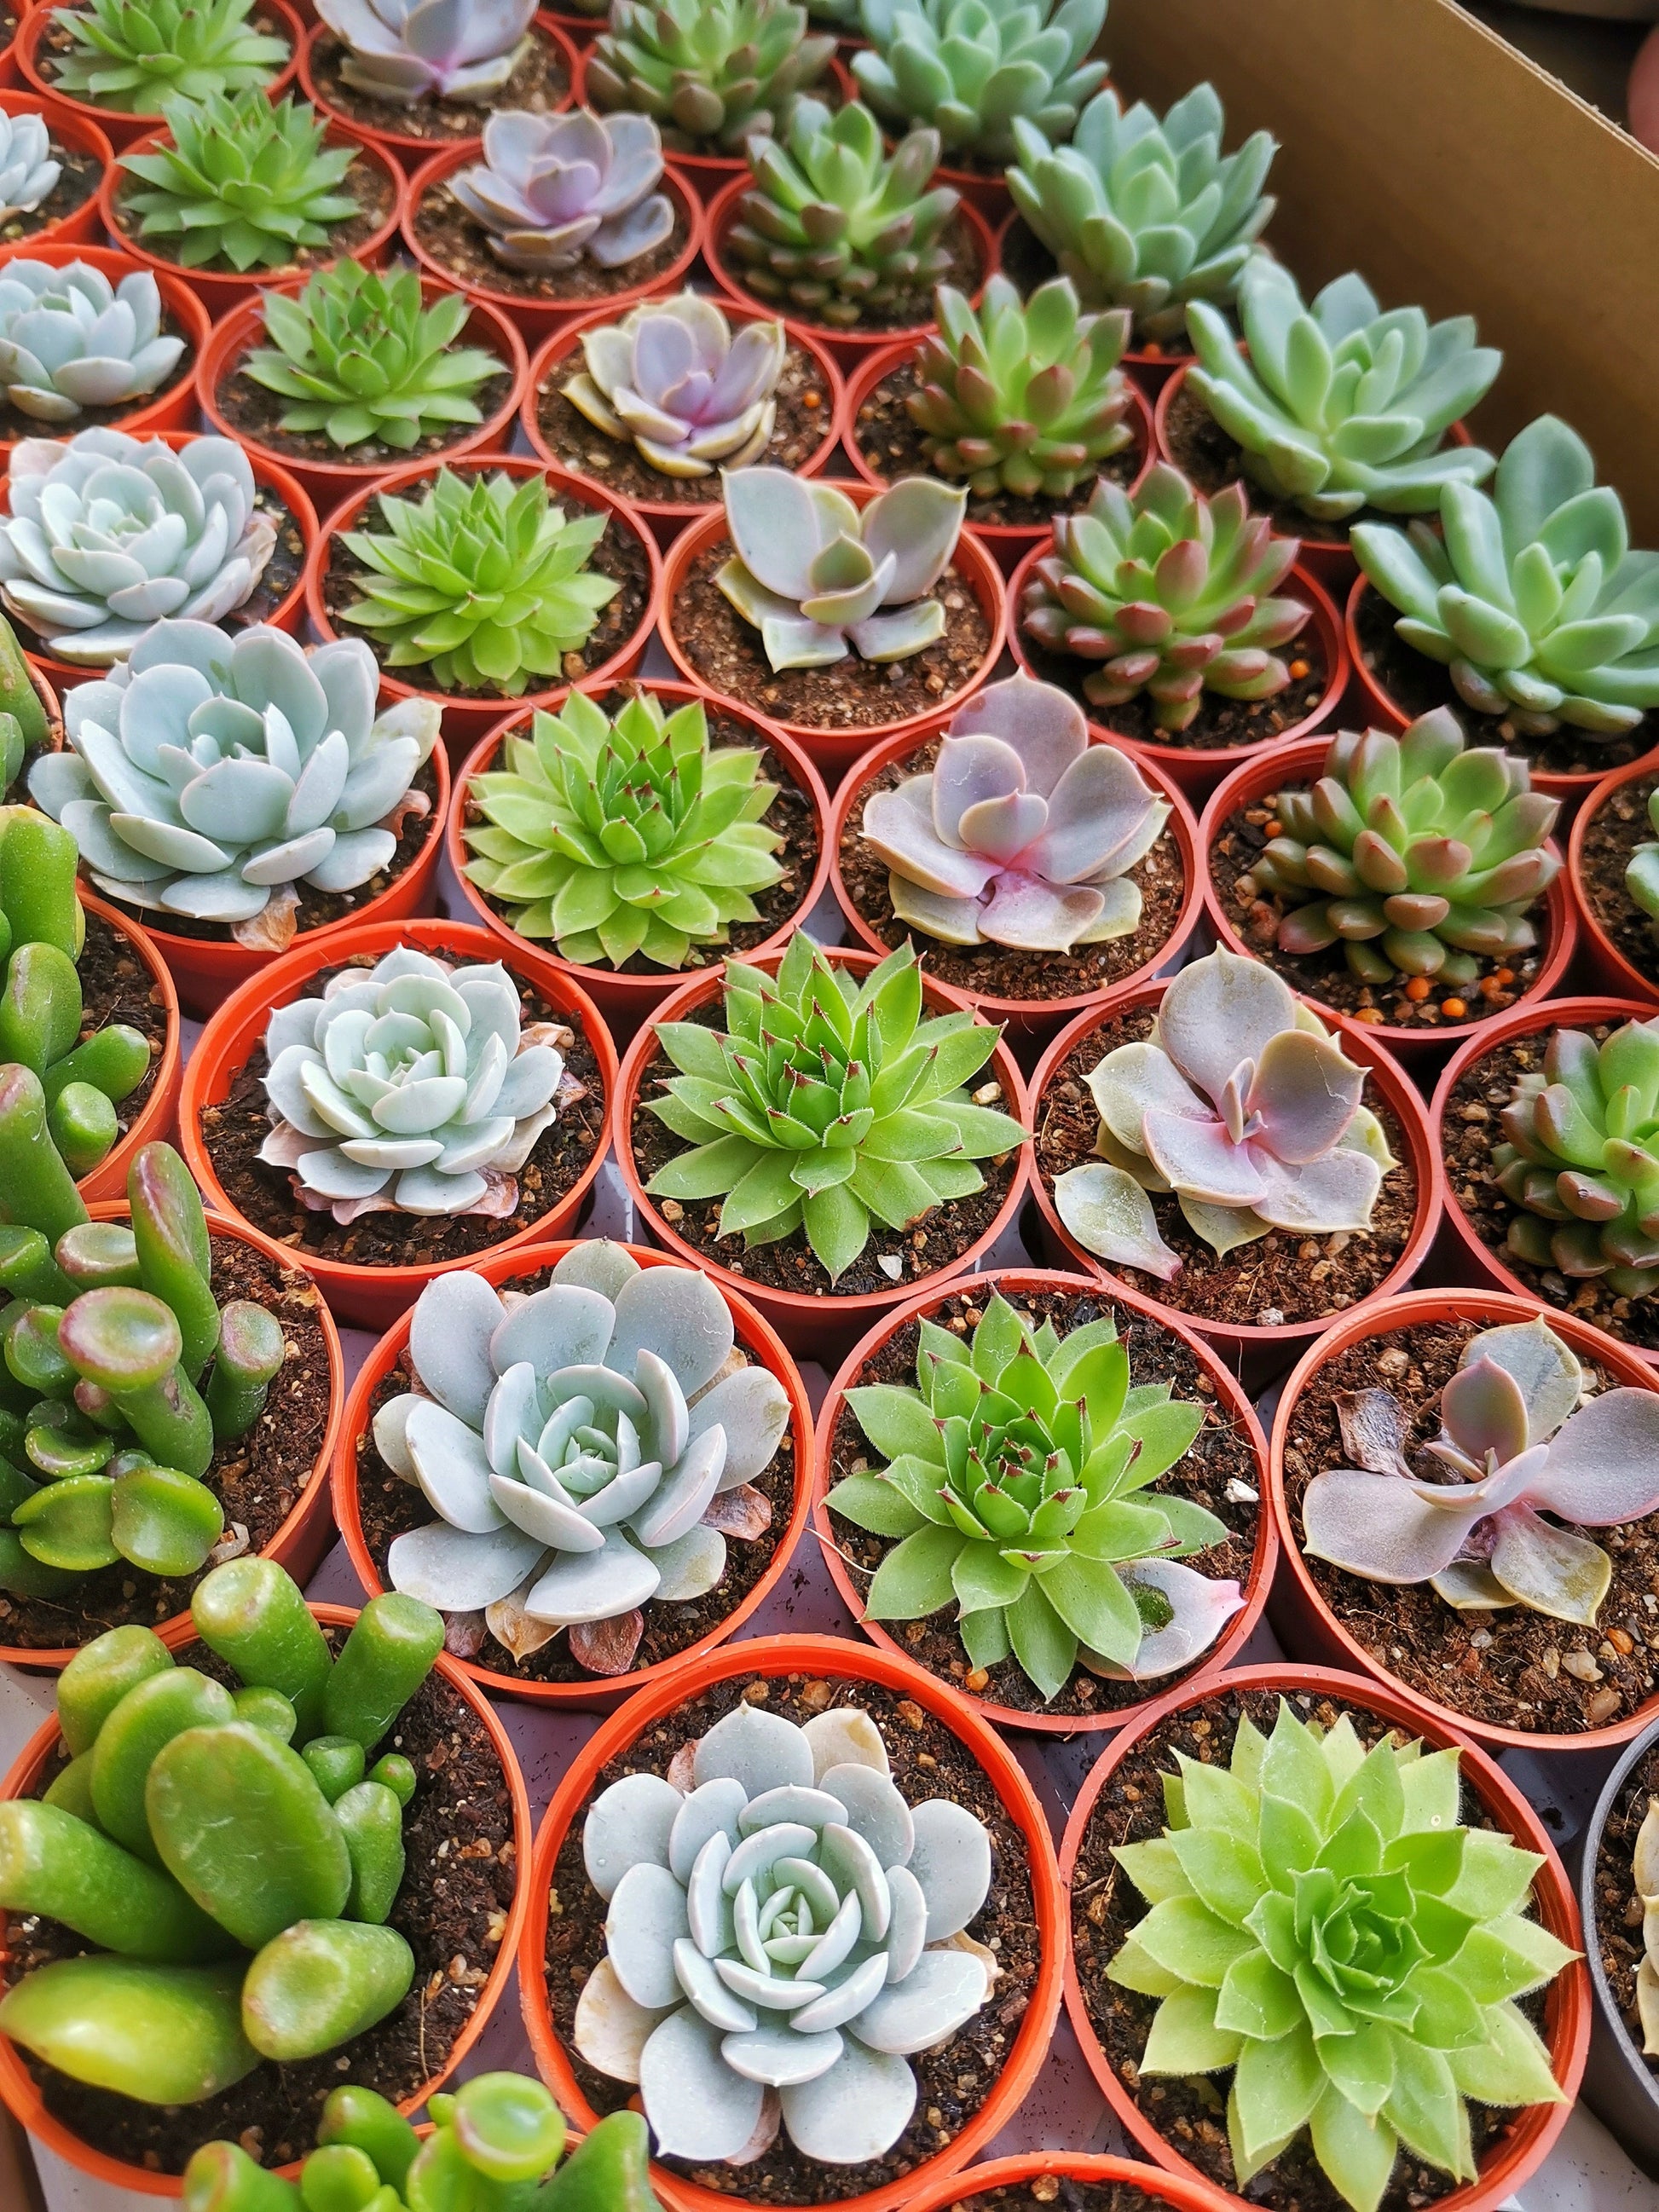 Healthy and beautiful potted succulent for wholesale - a fresh and vibrant choice for retail or gifting.